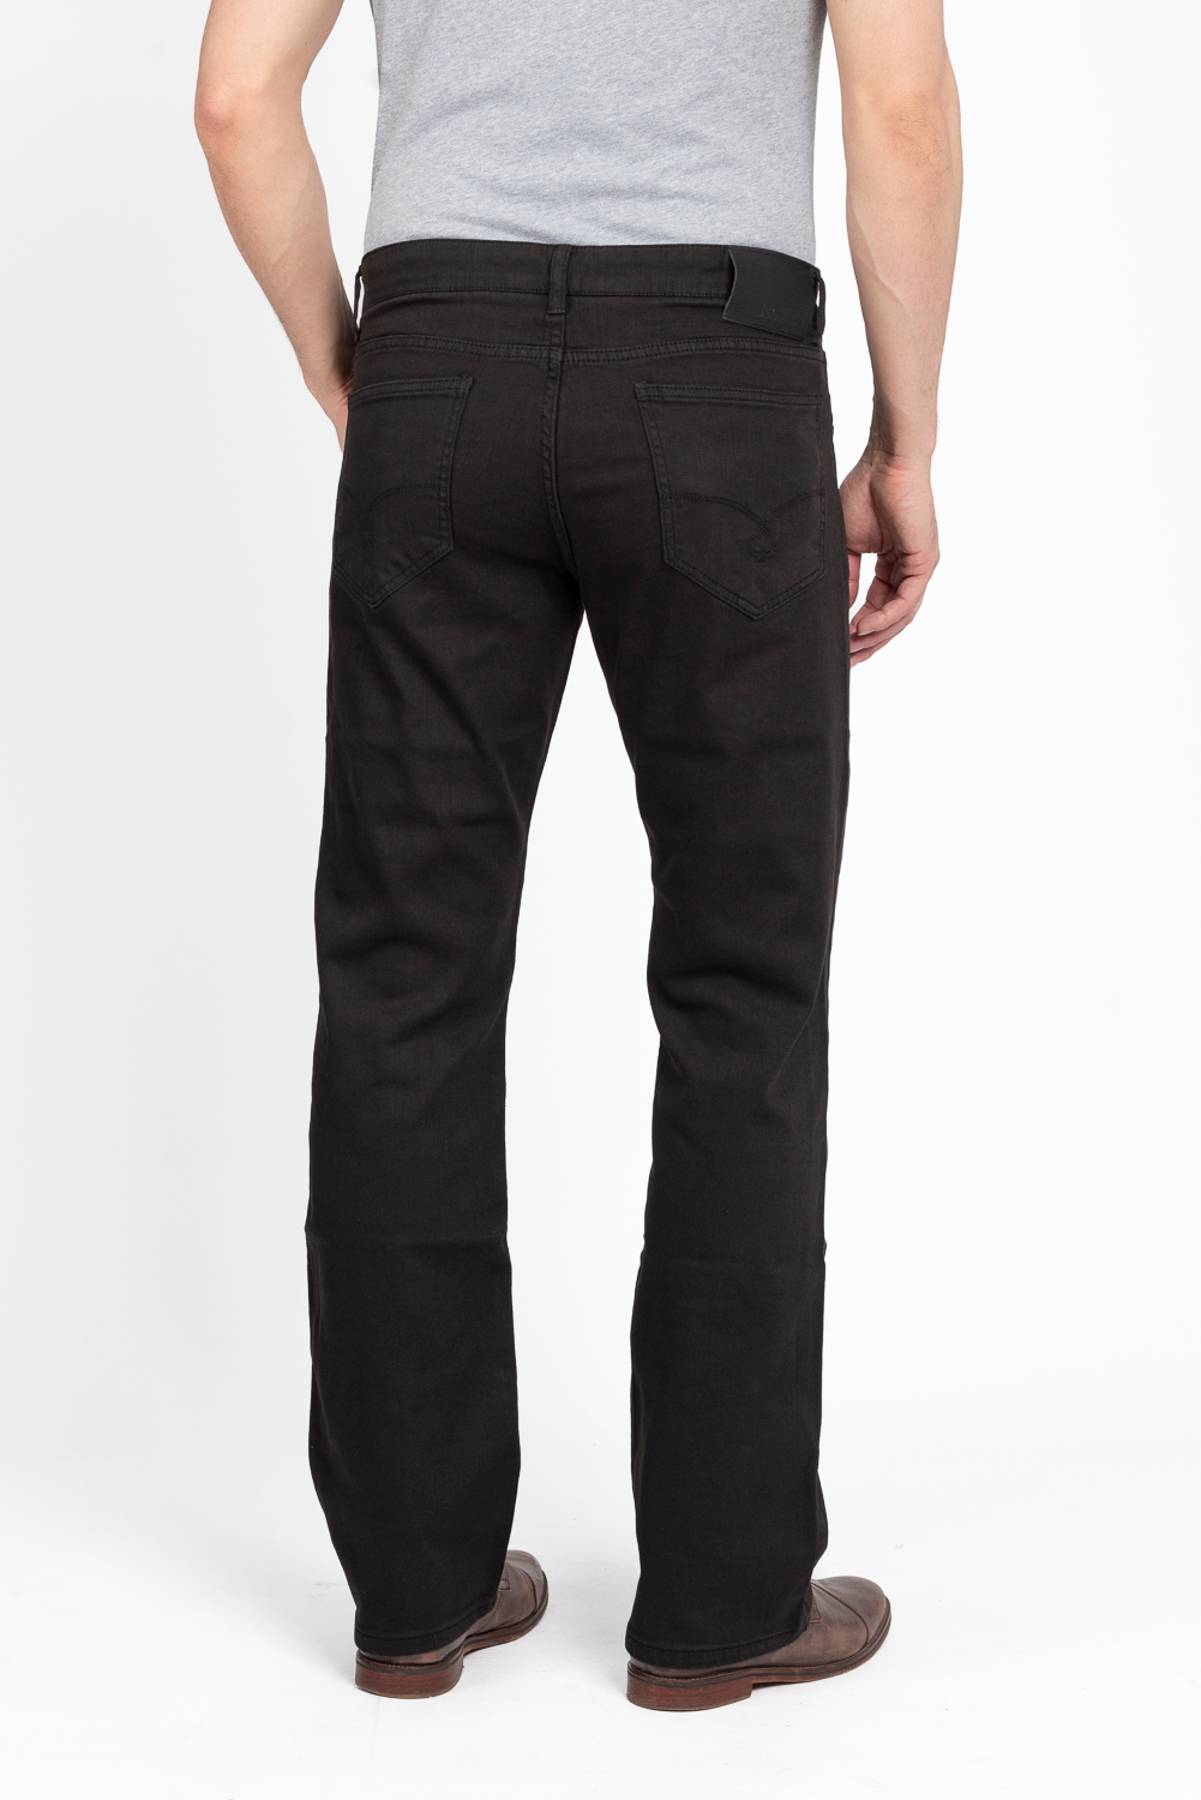 High Roller Fit Black Twill